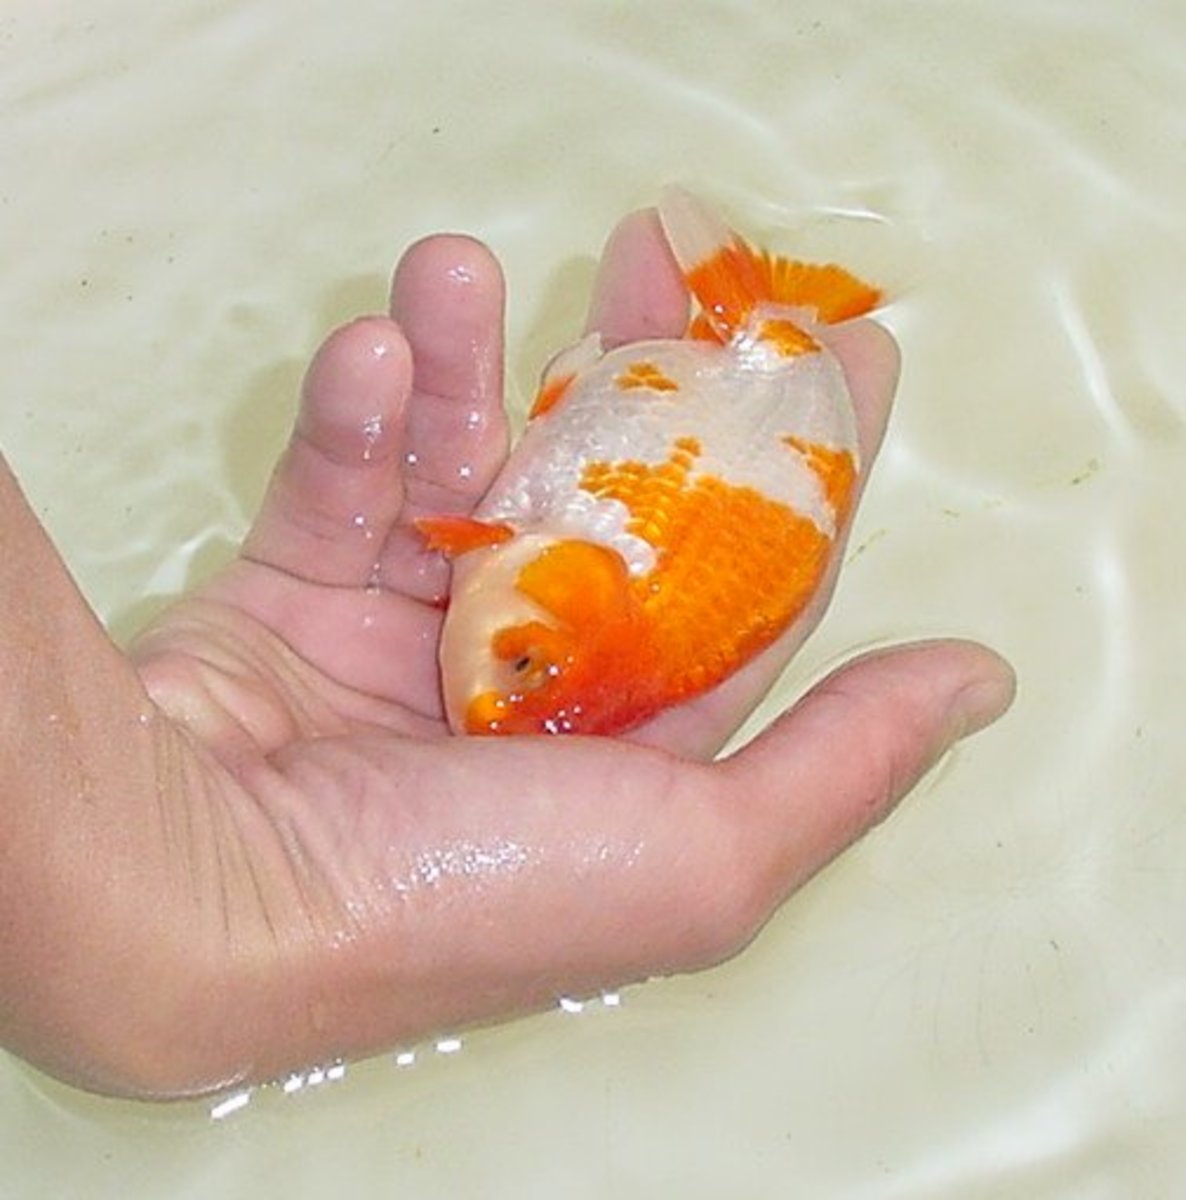 Ranchus are friendly, and some allow their owners to pat them!